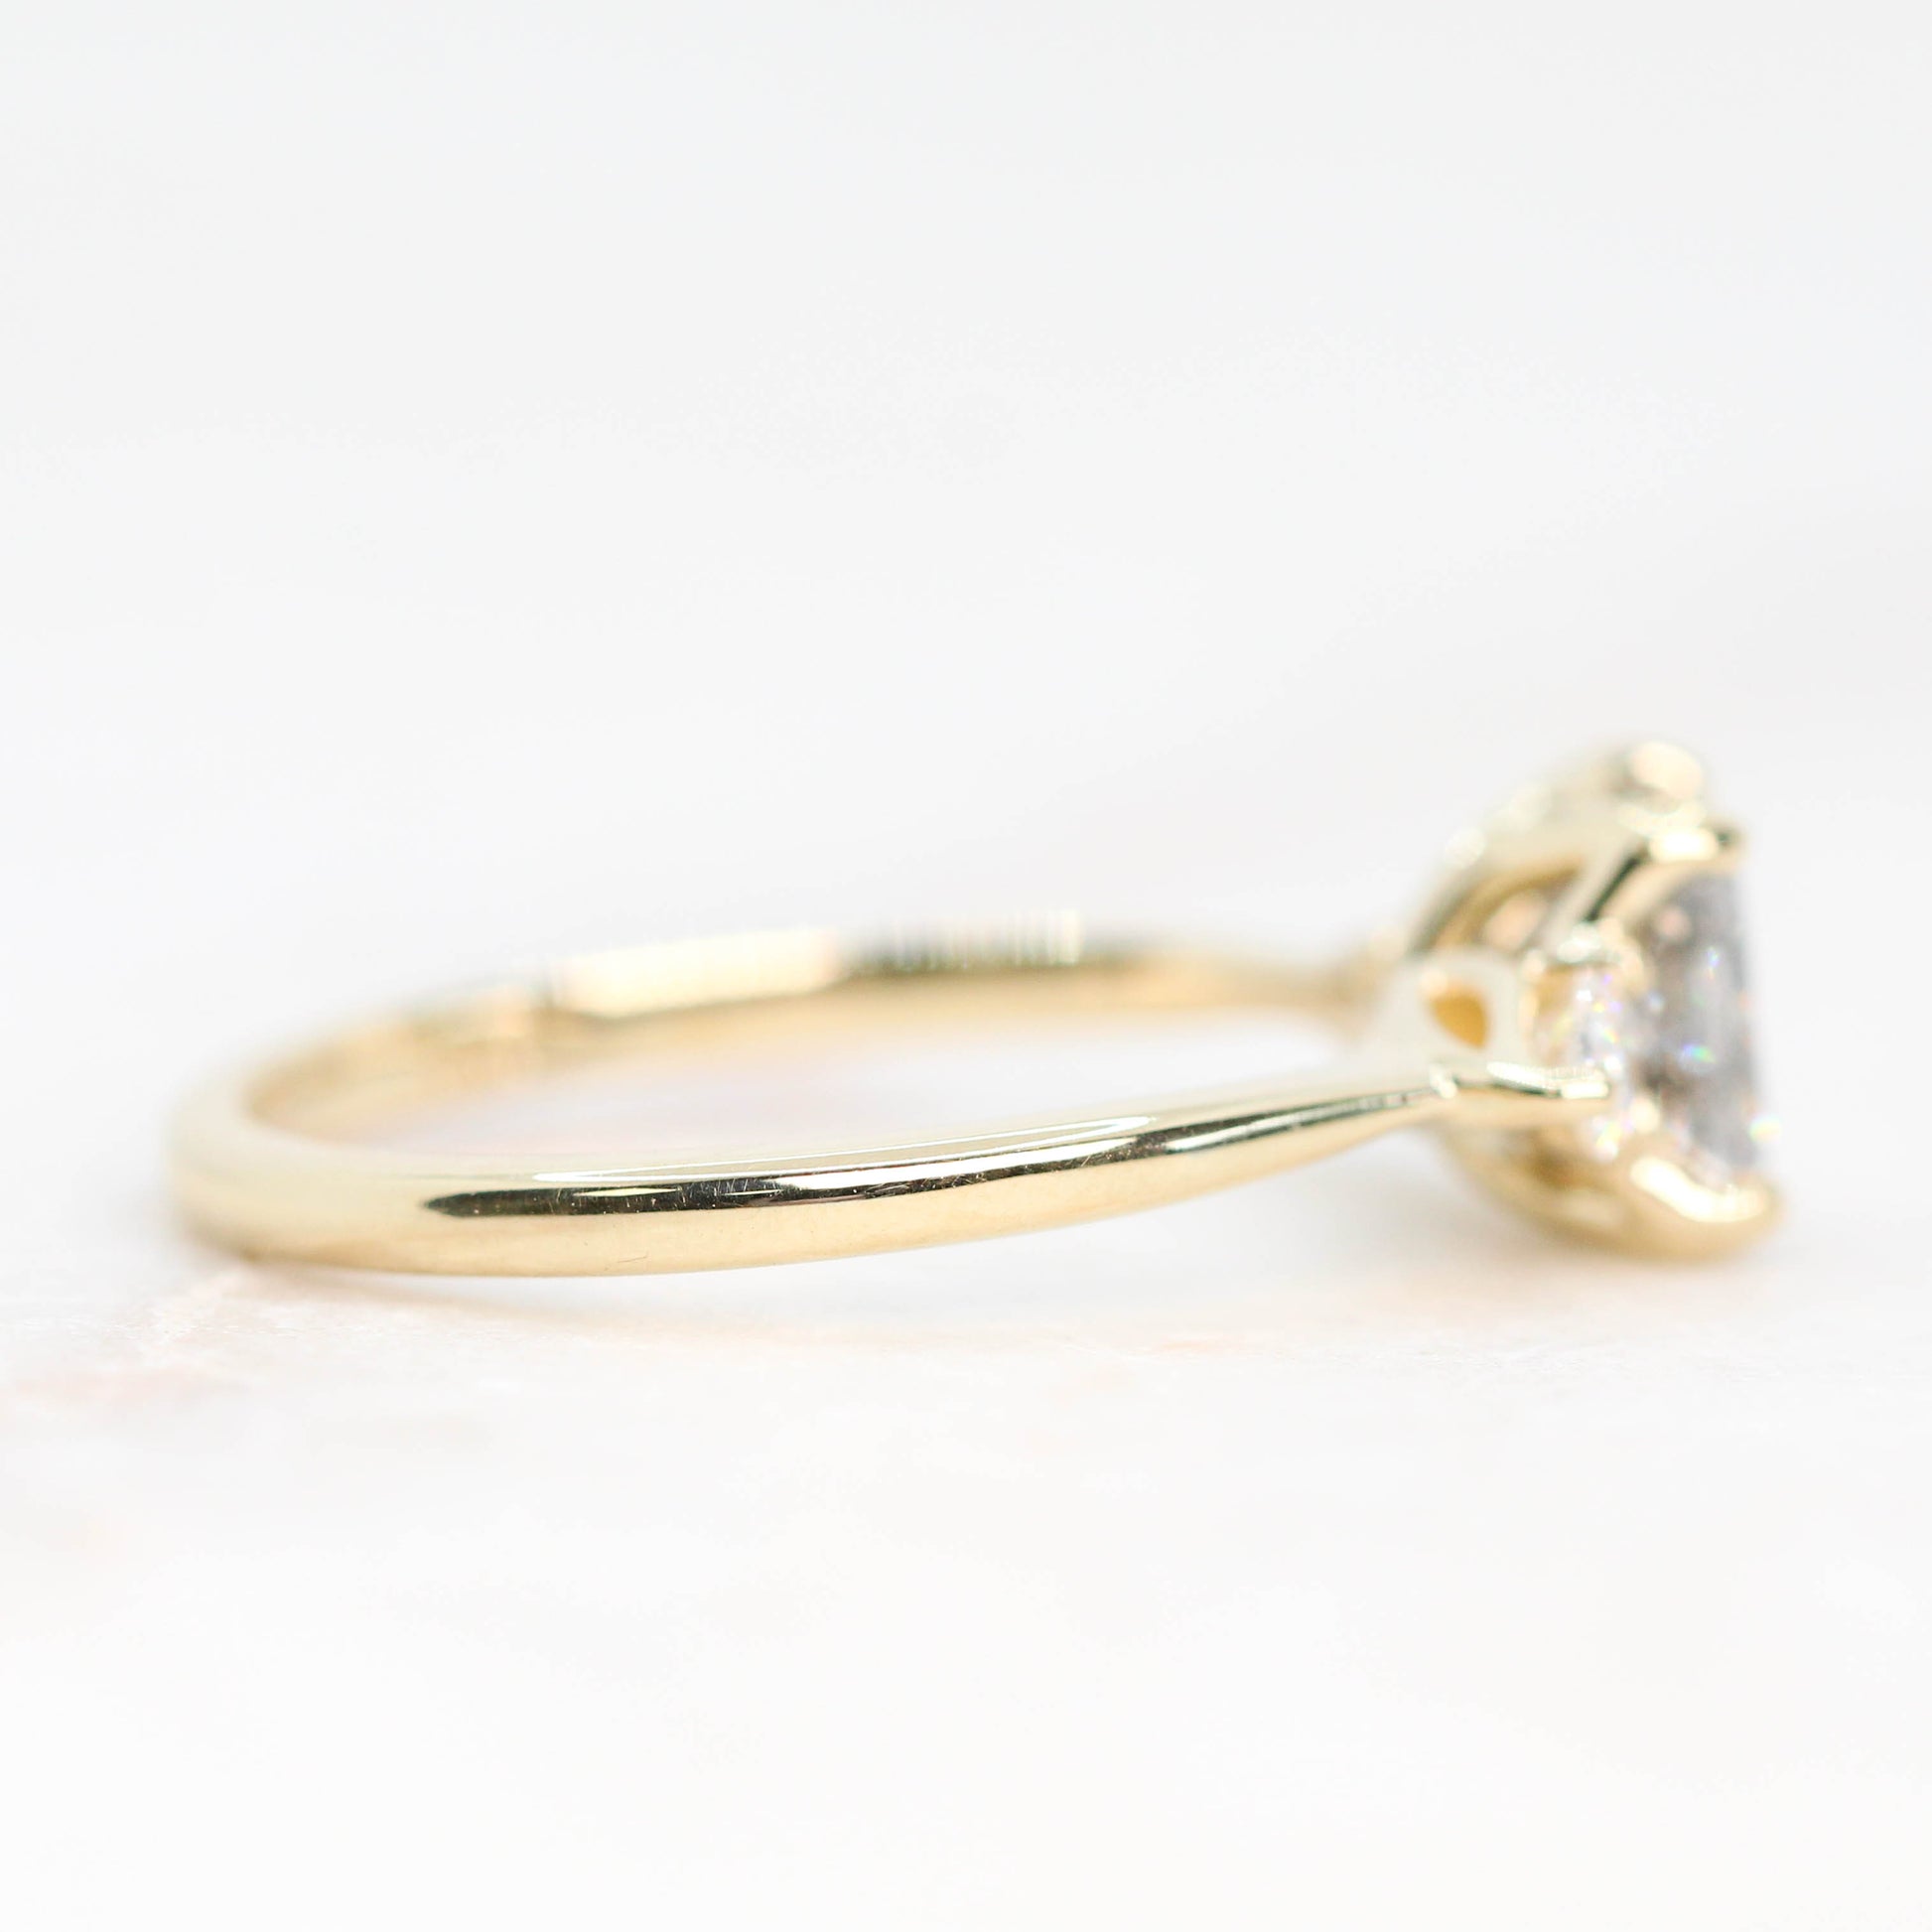 Oleander Ring with a 1.35 Carat Gray Celestial Princess Cut Diamond and White Accent Diamonds in 14k Yellow Gold - Ready to Size and Ship - Midwinter Co. Alternative Bridal Rings and Modern Fine Jewelry